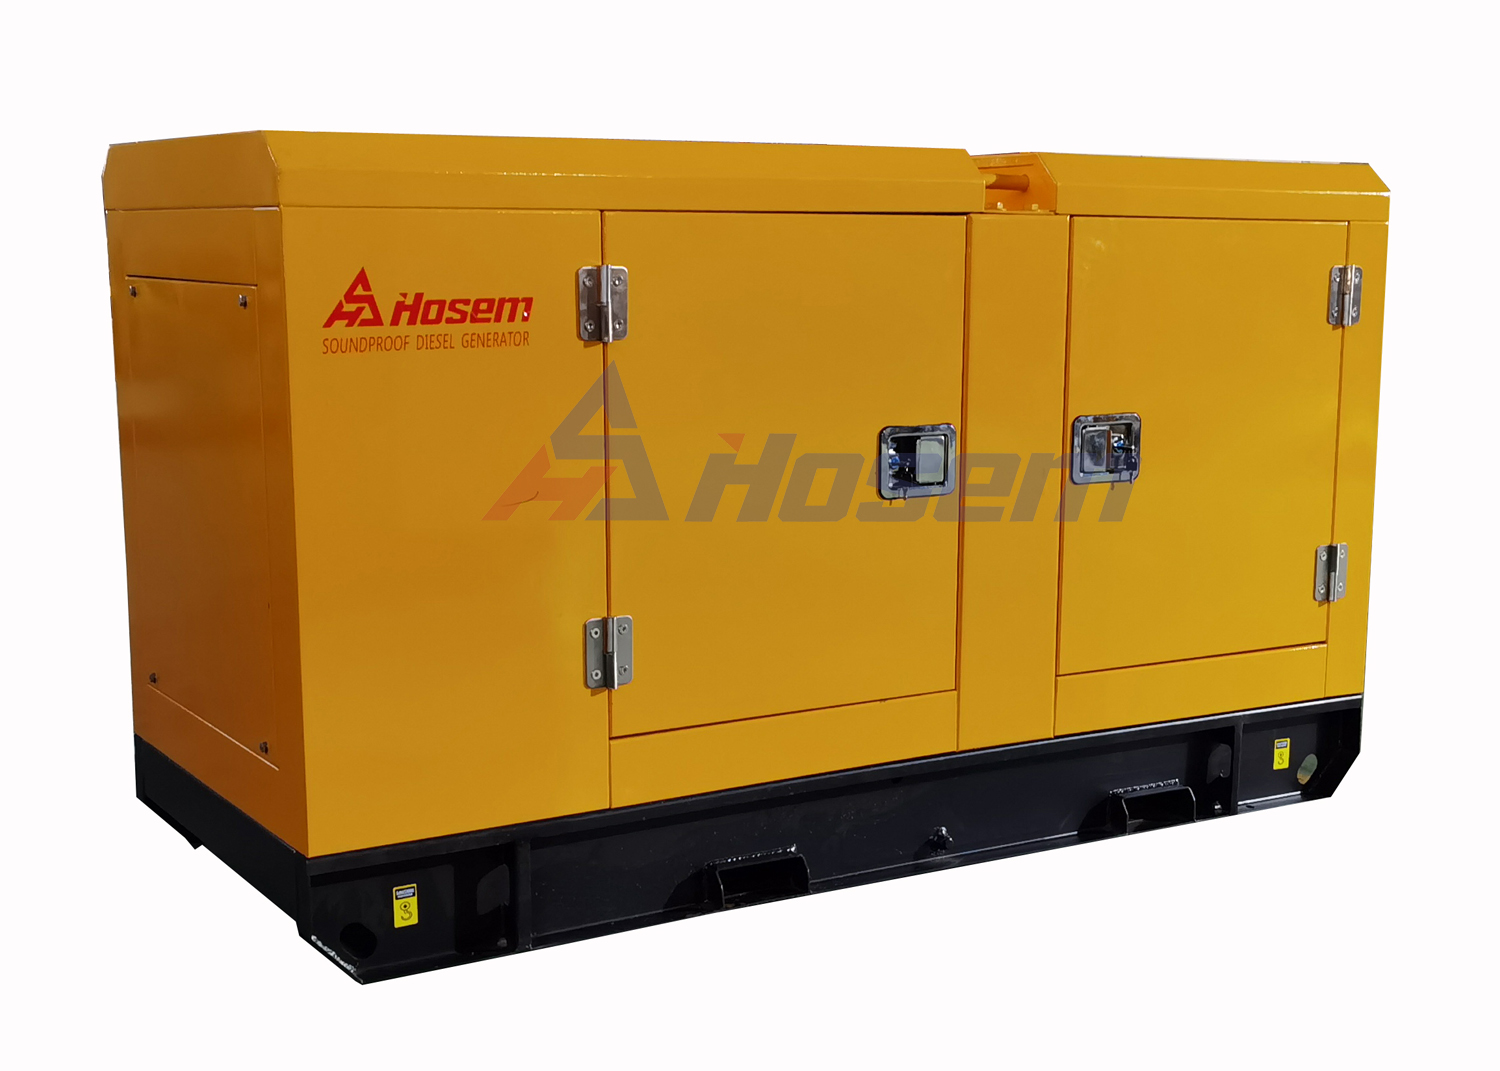  Three Phase 10kVA Perkis Diesel Generator For House , Soundproof Generator For Outdoor